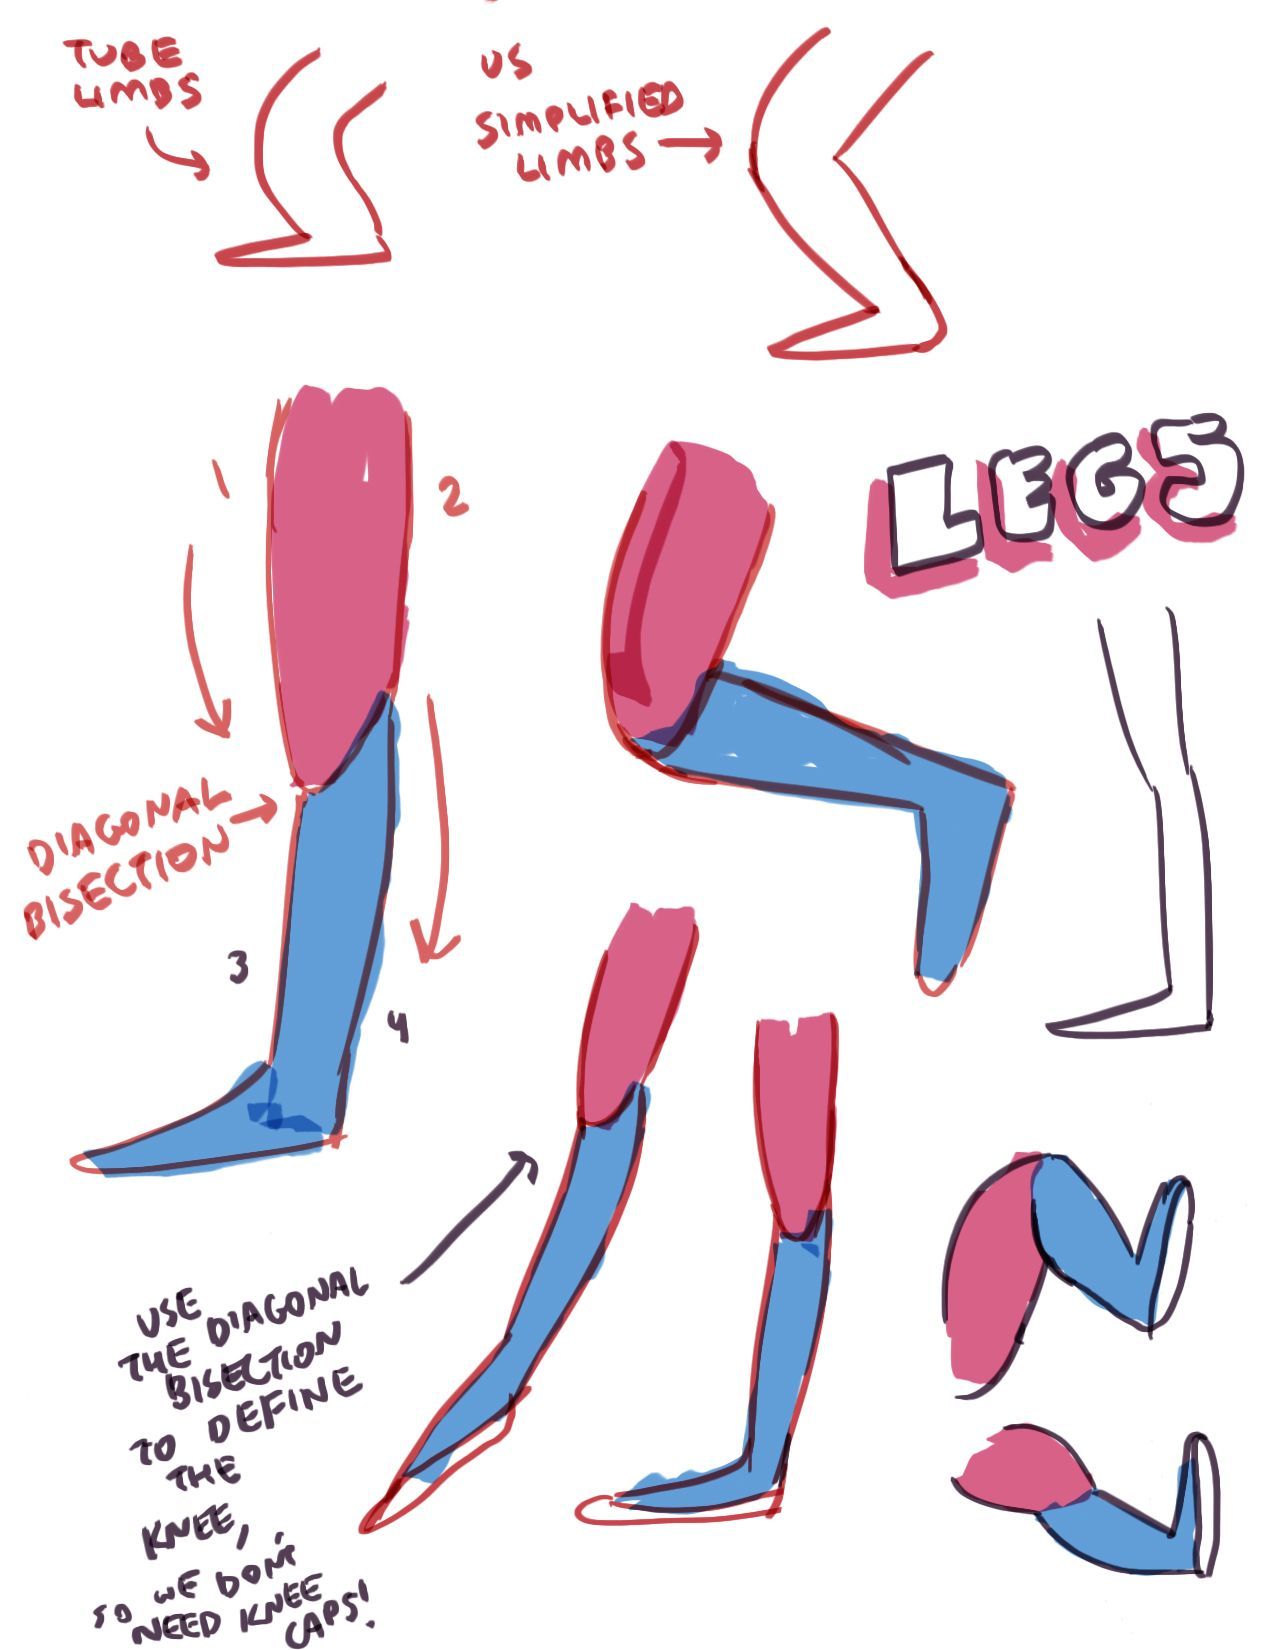 stevencrewniverse: Arm and leg theories by show creator Rebecca Sugar: Early concepts for how to treat lim